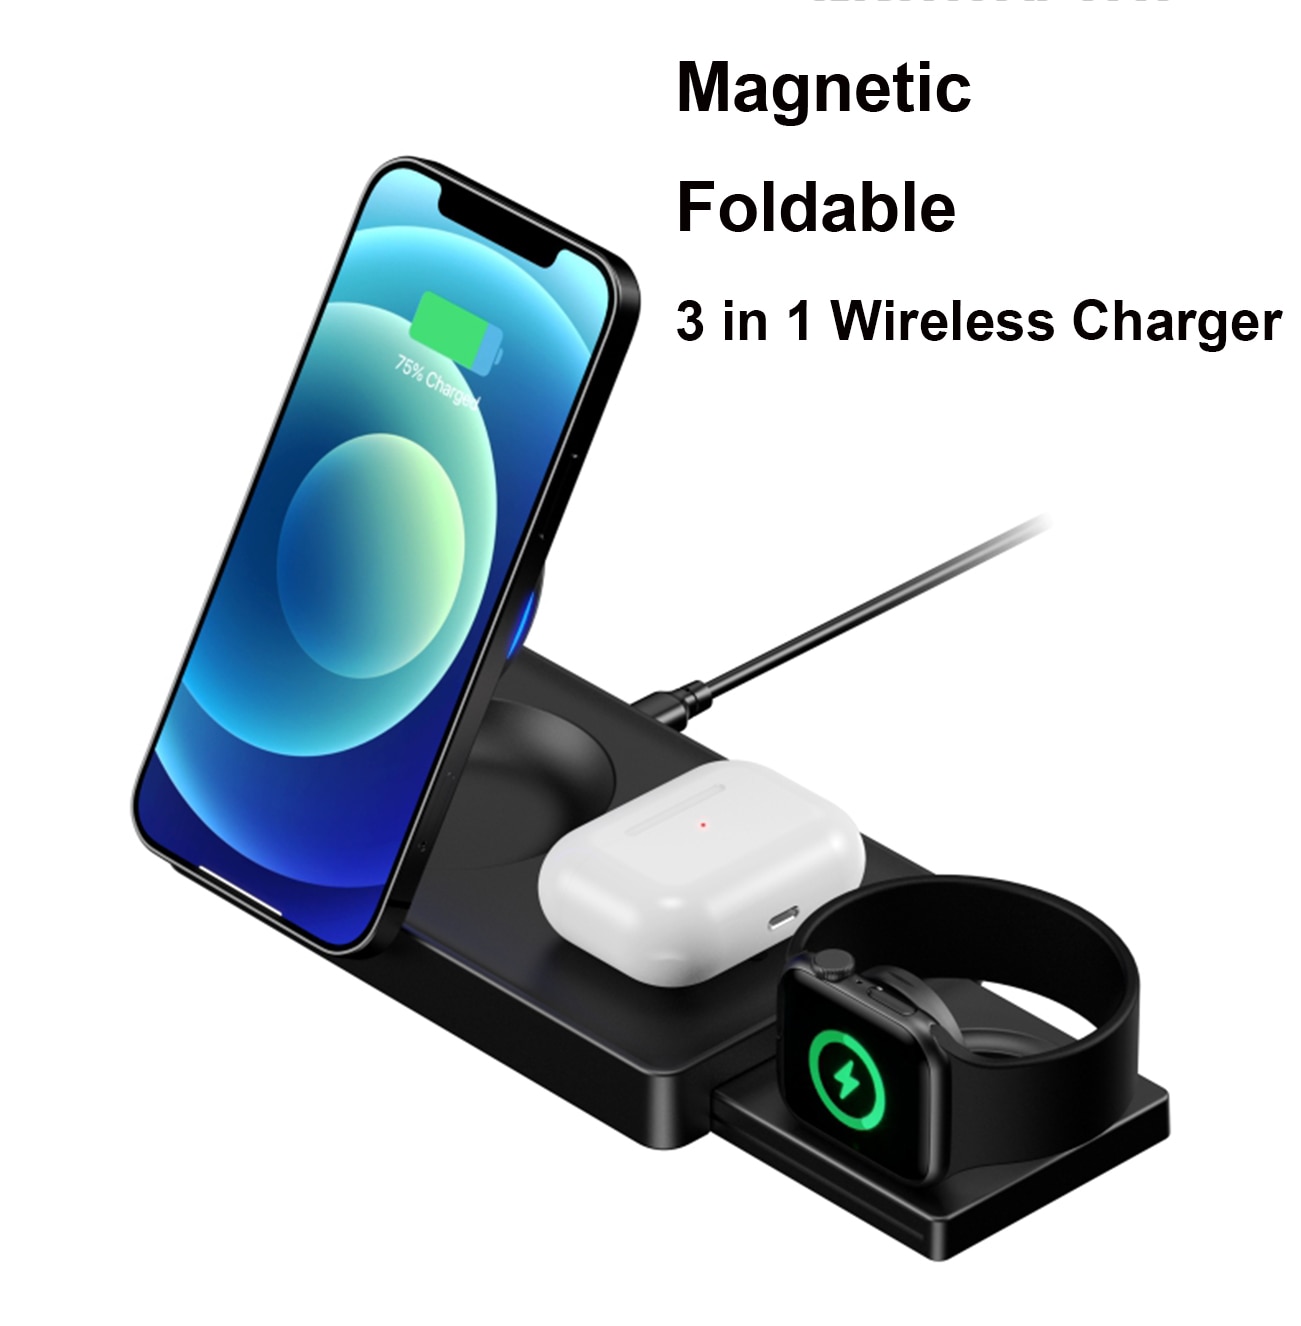 Magnetic Wireless Charger Foldable 3 In 1 Multifunction For Iphone, Iwatch, Airpod